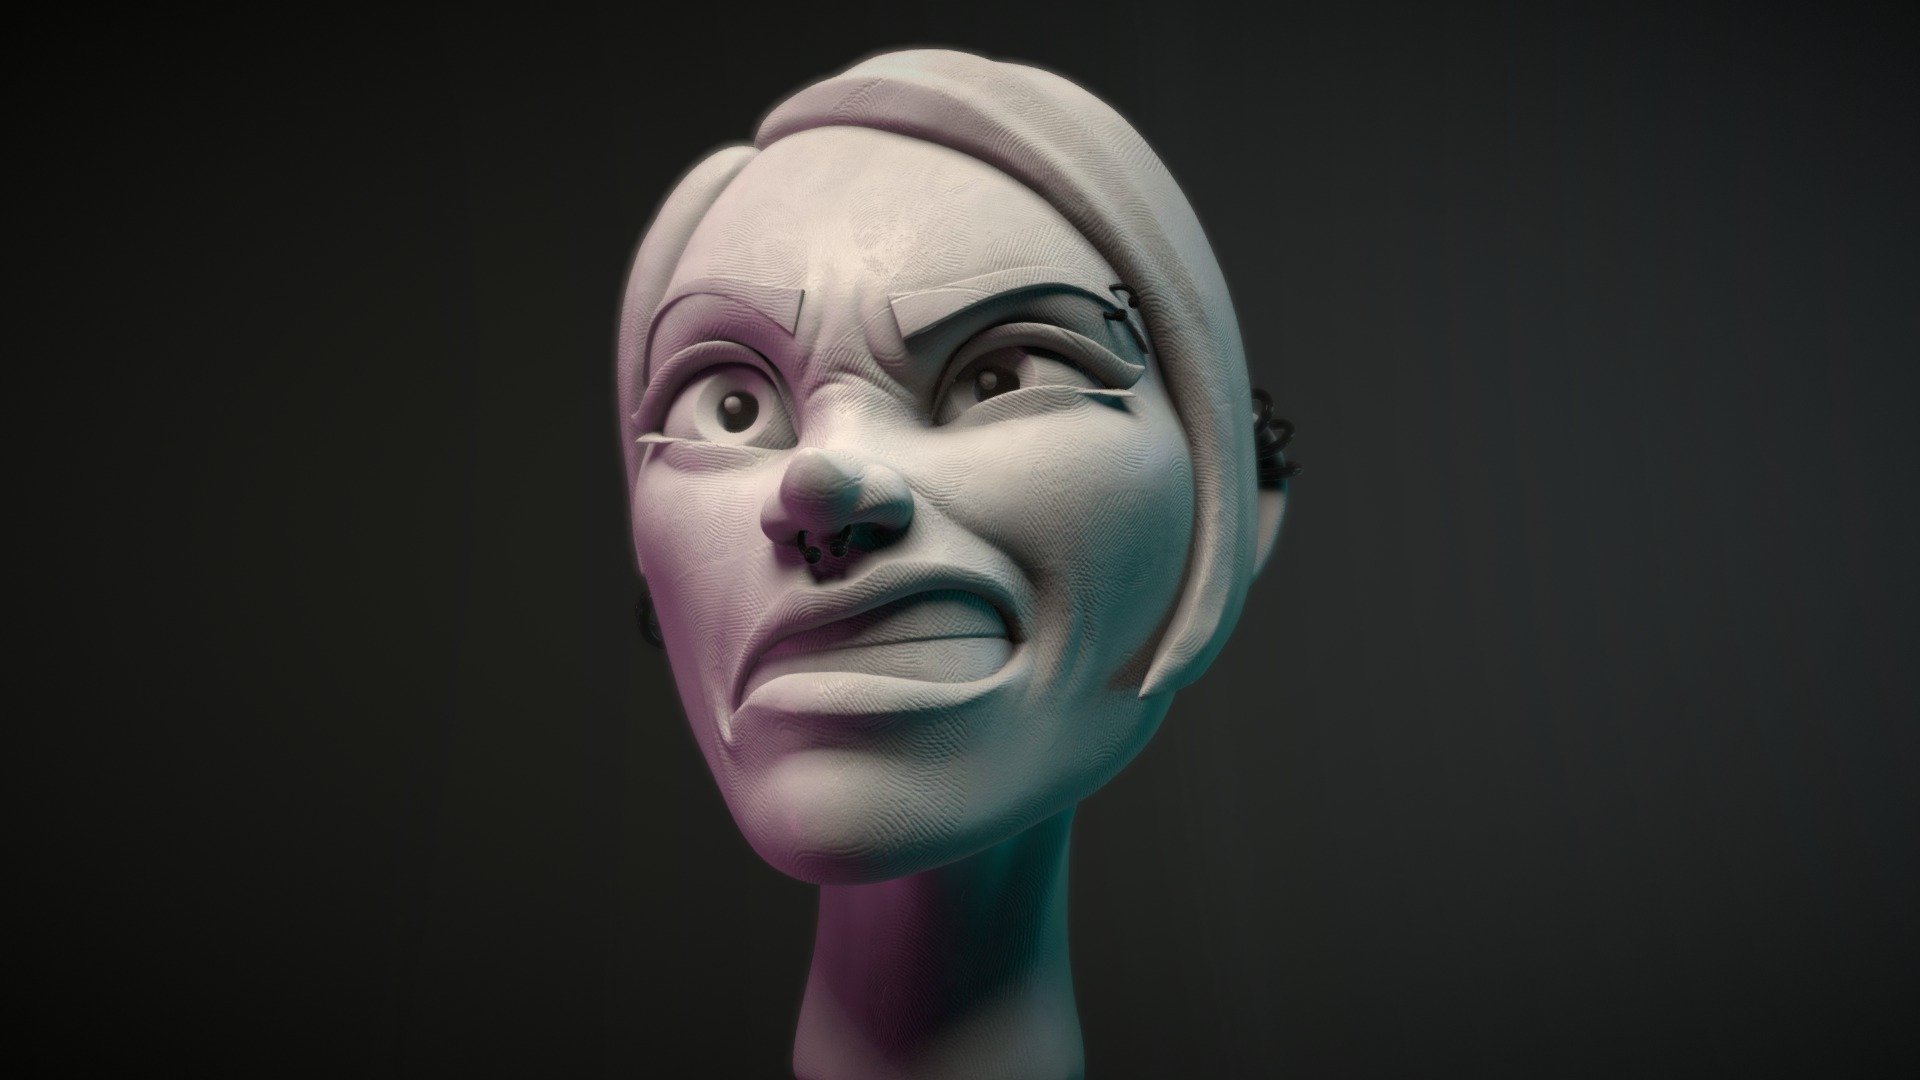 Day 10 for SculptJanuary with the topic &ldquo;Expression - Disgust